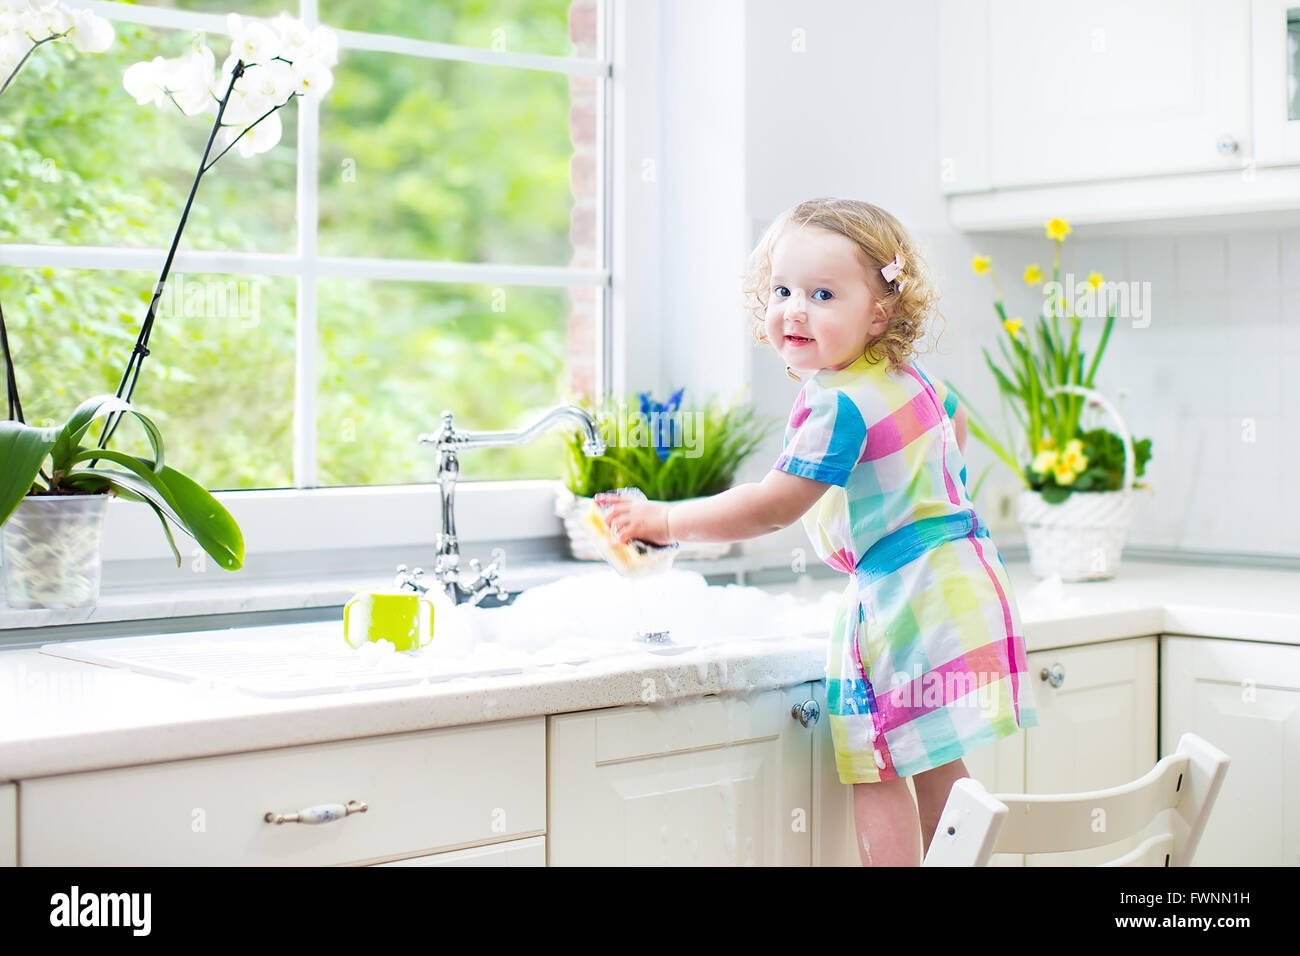 Cute curly toddler girl in a colorful dress washing dishes, cleaning with a sponge and playing with foam in the sink Stock Photo